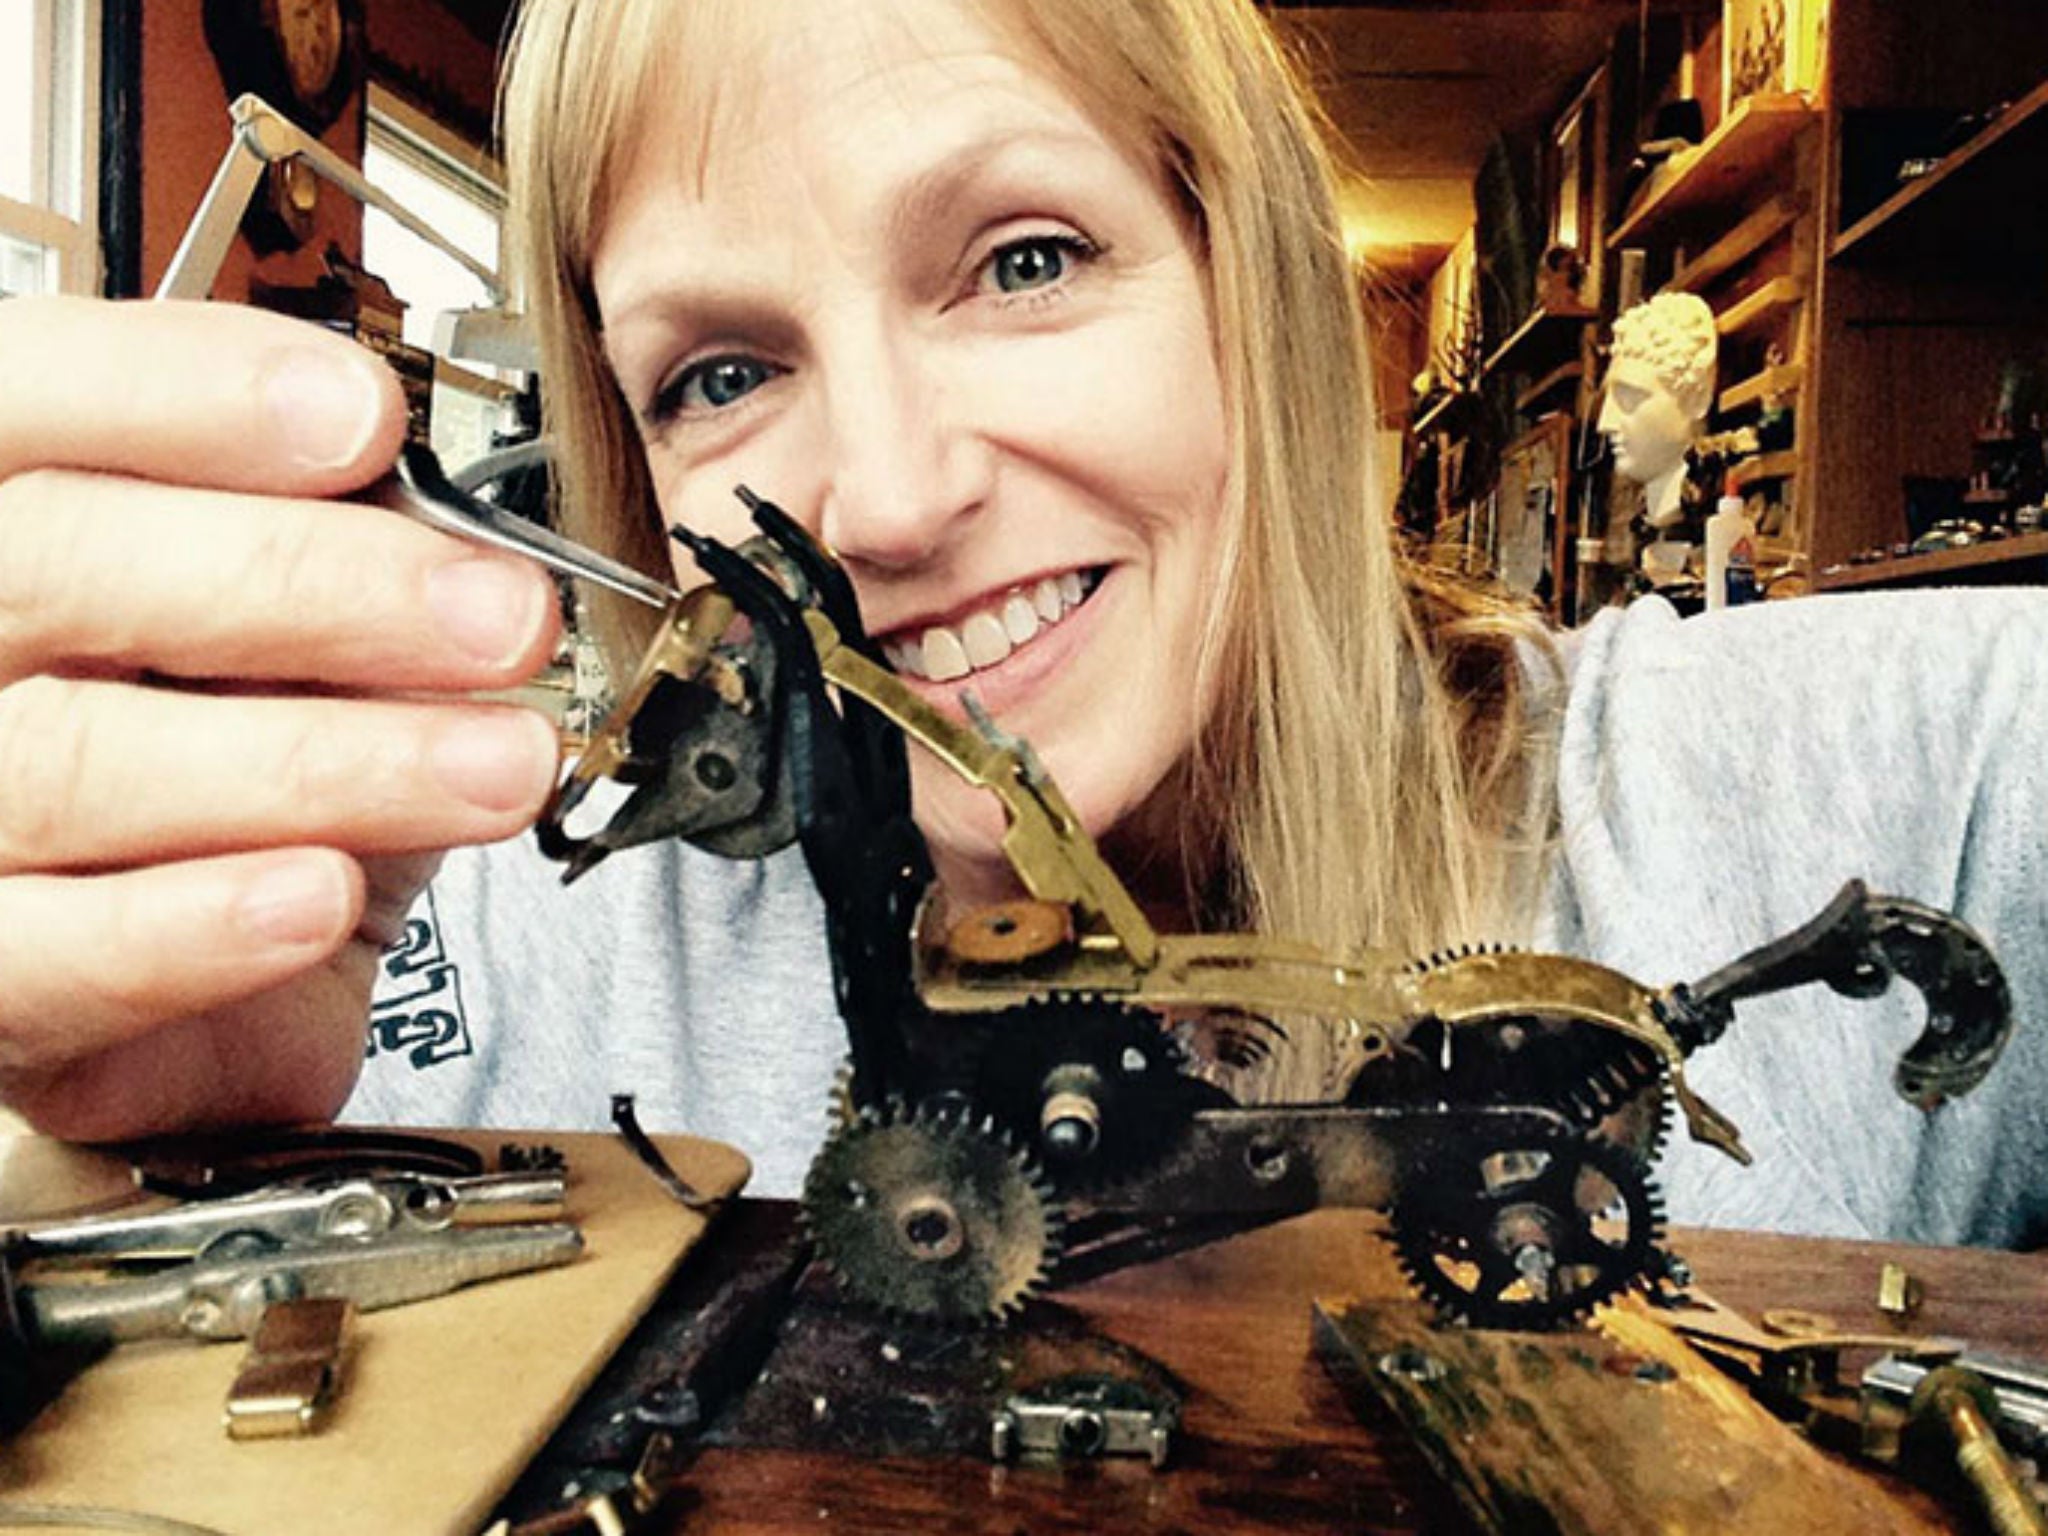 Sue Beatrice incorporates natural elements into her steampunk sculptures and jewellery